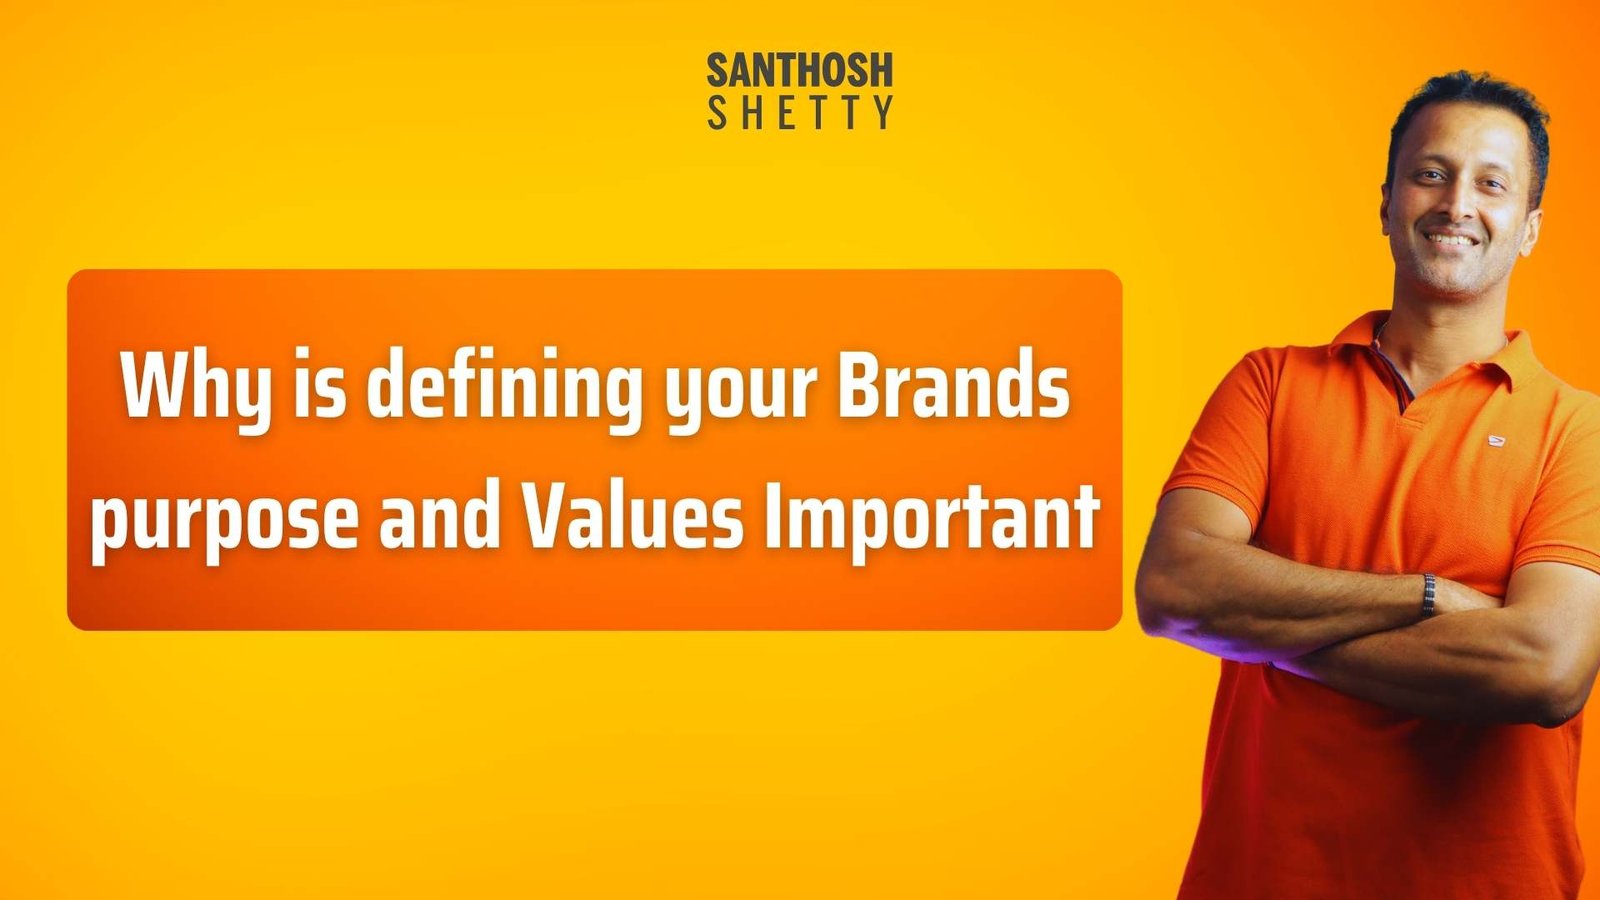 Why is defining your Brands purpose and Values Important